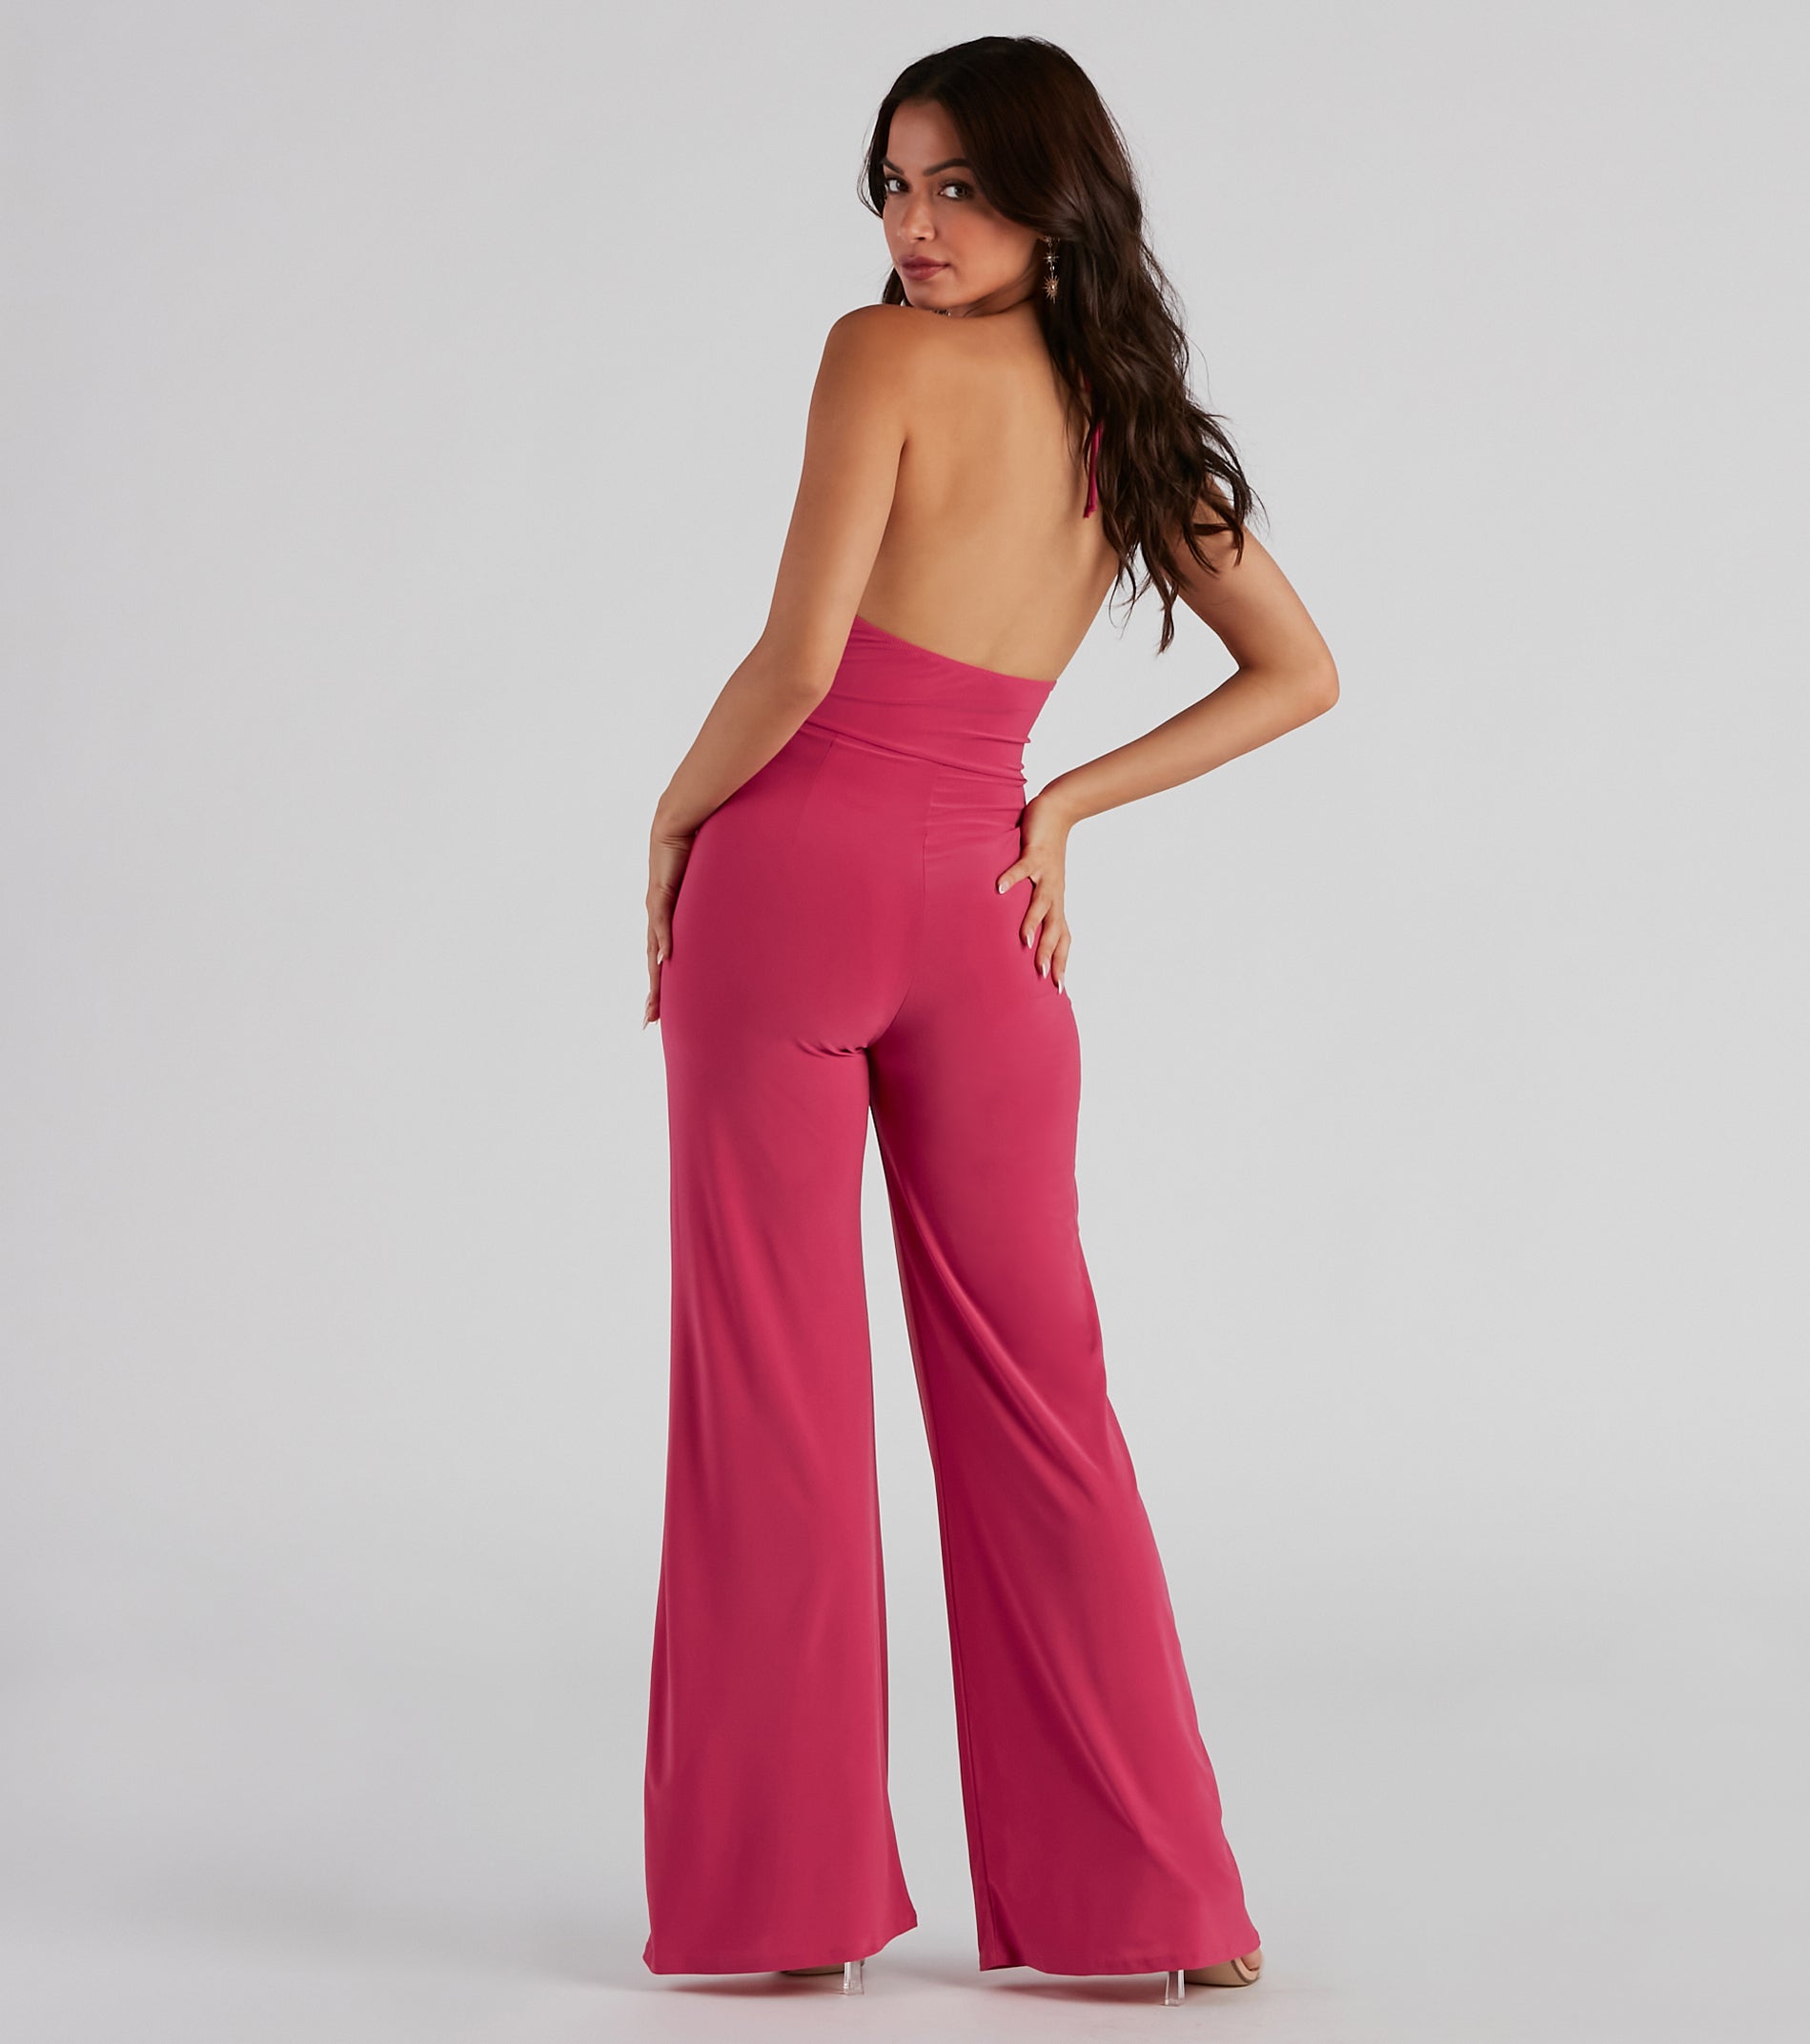 Go With The Flow Halter Jumpsuit